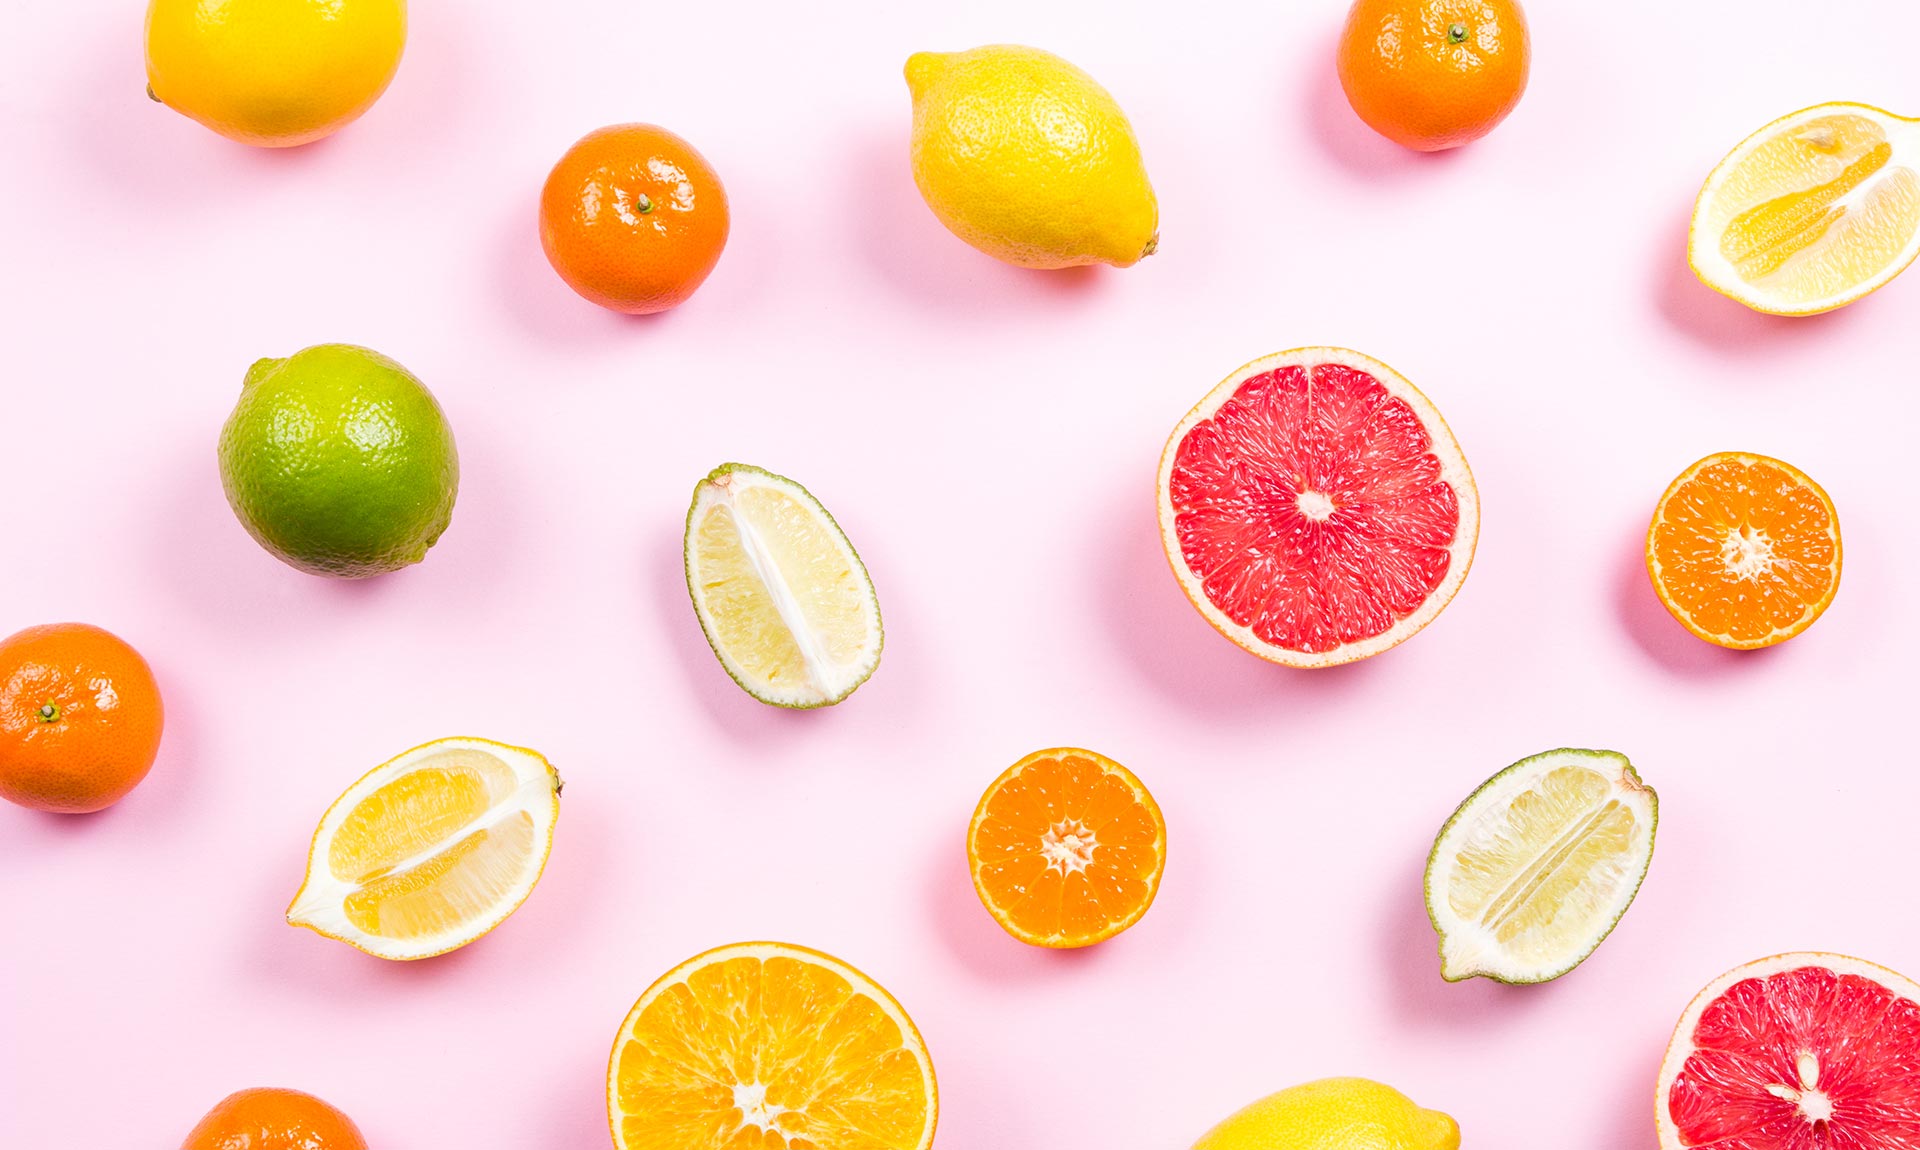 Whole and sliced citrus fruit is scattered against a pink paper backdrop.